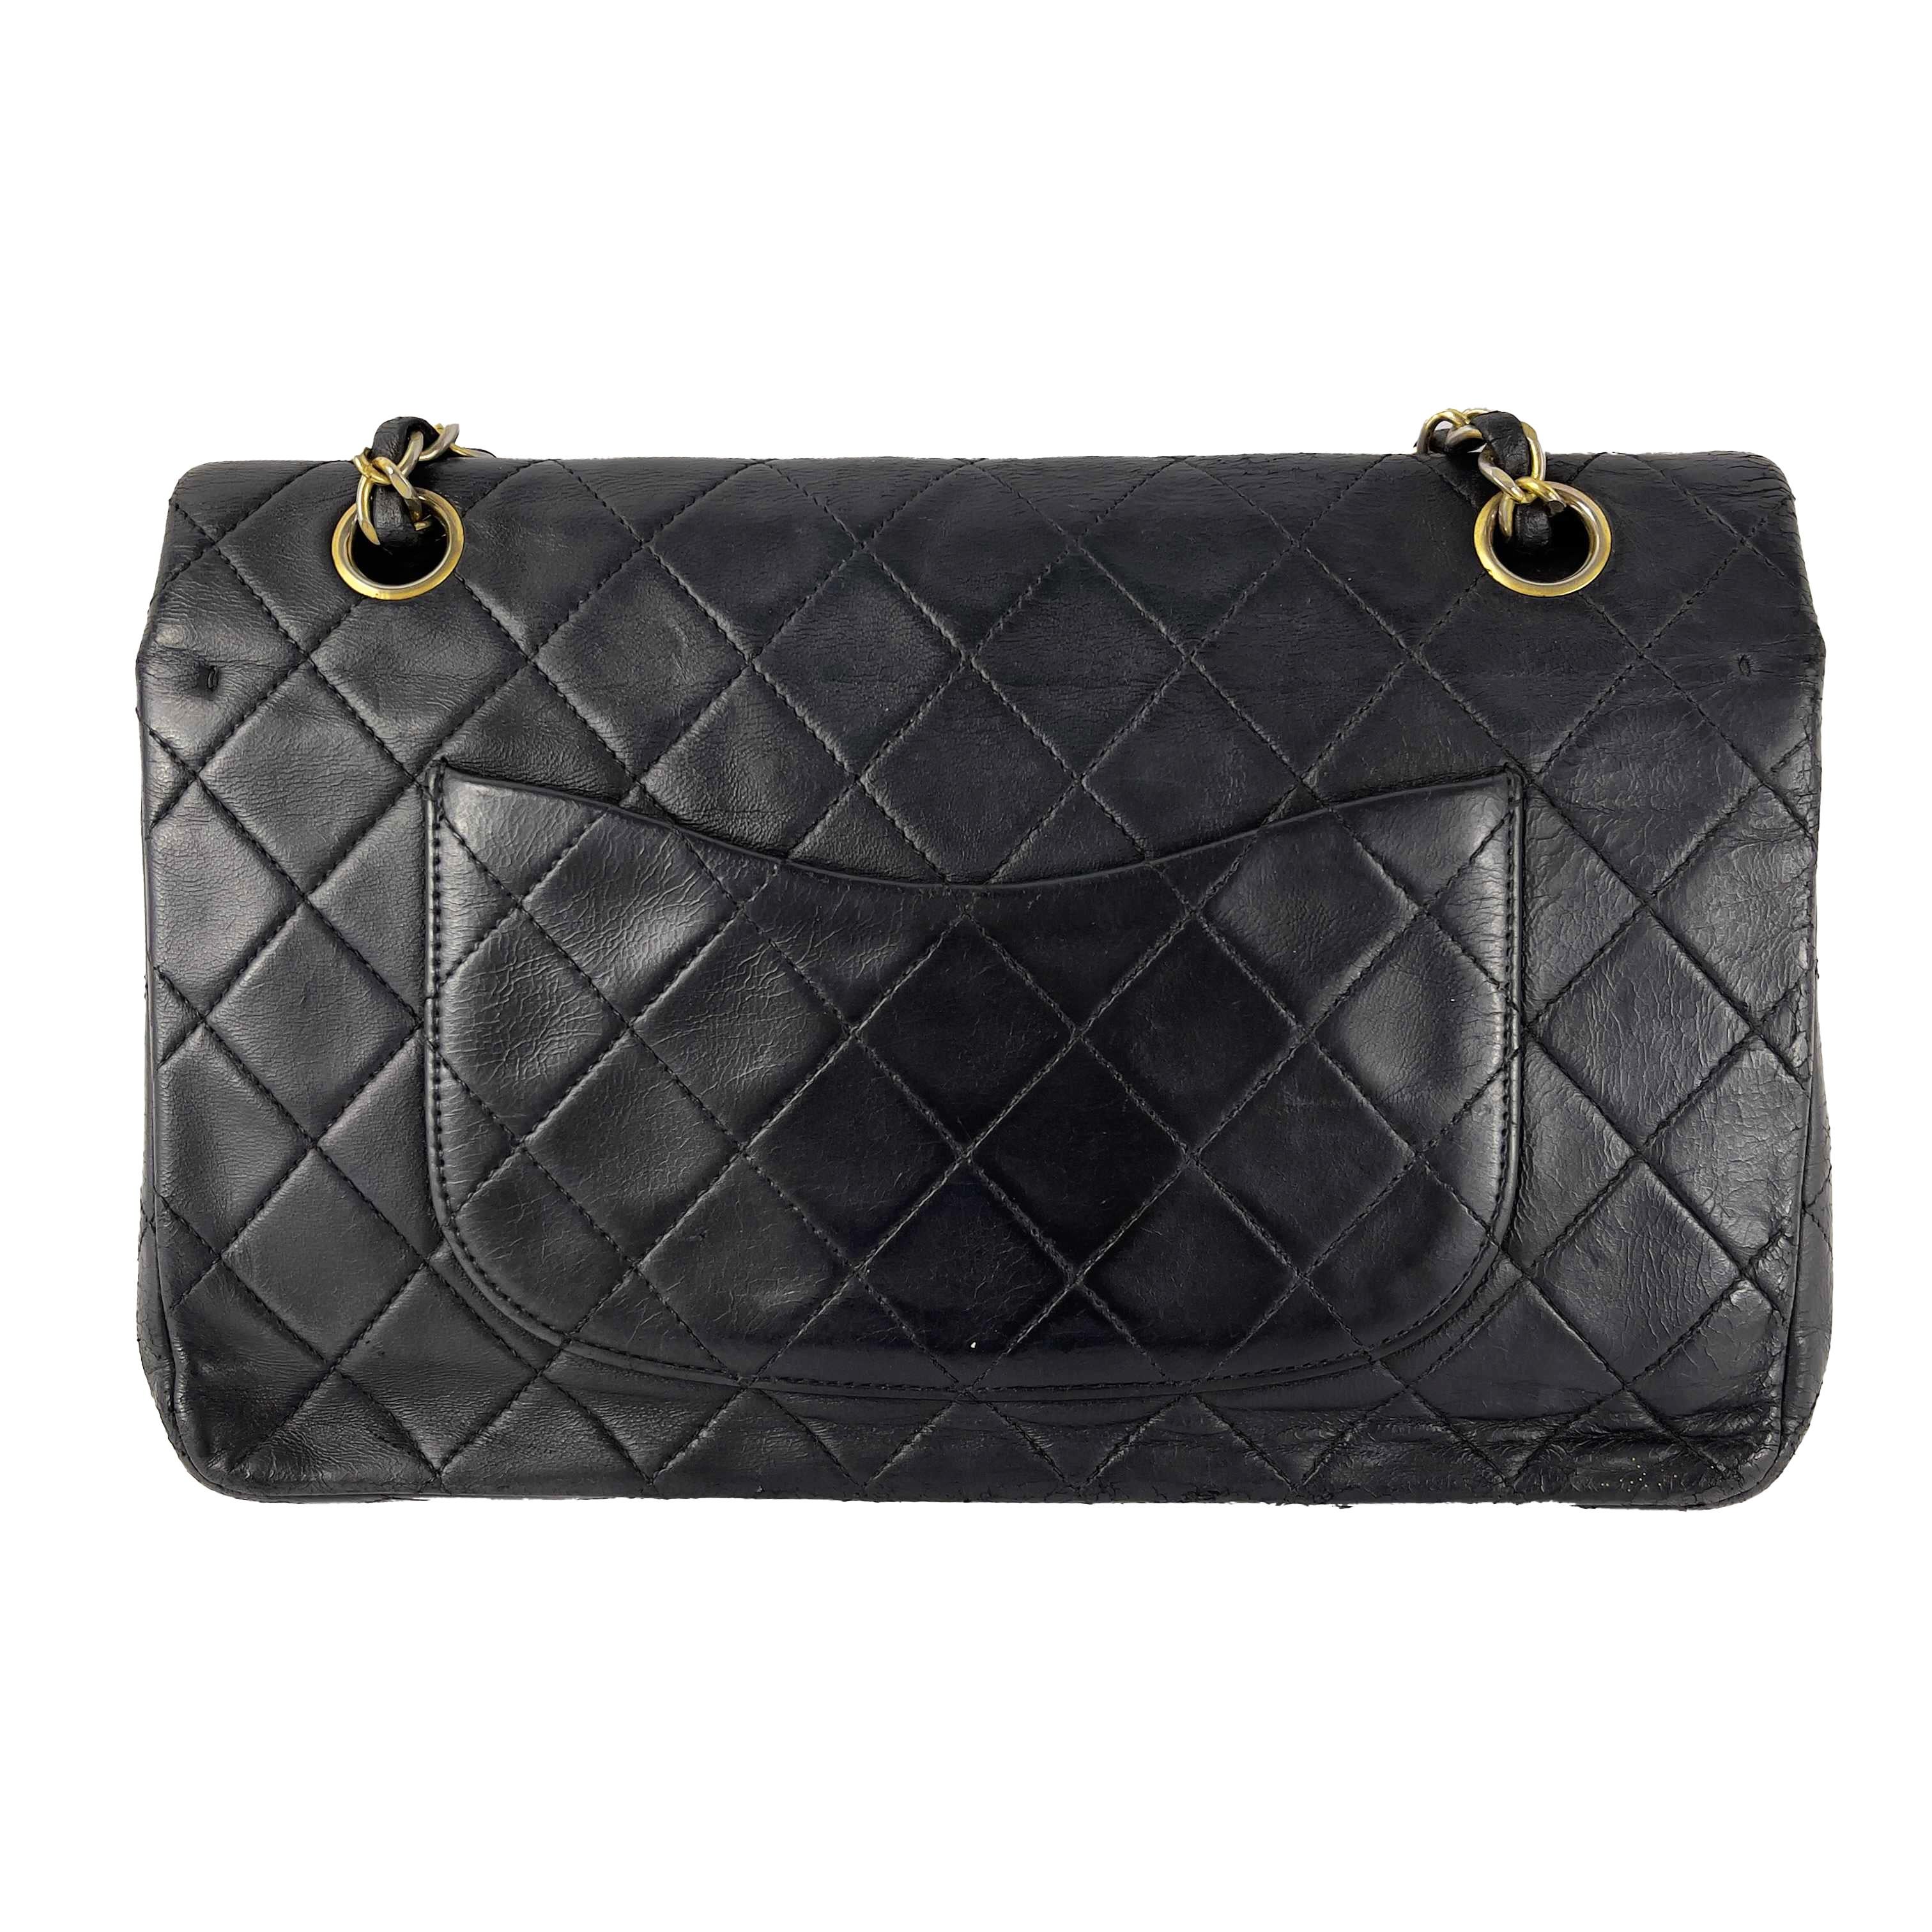 CHANEL- Vintage Medium Classic Double Flap - Black Shoulder Bag / Crossbody 

Description

This Chanel Quilted Leather Classic double Flap Bag is one of the most sought after bag in Chanel's classic collection, which continues to appreciate in